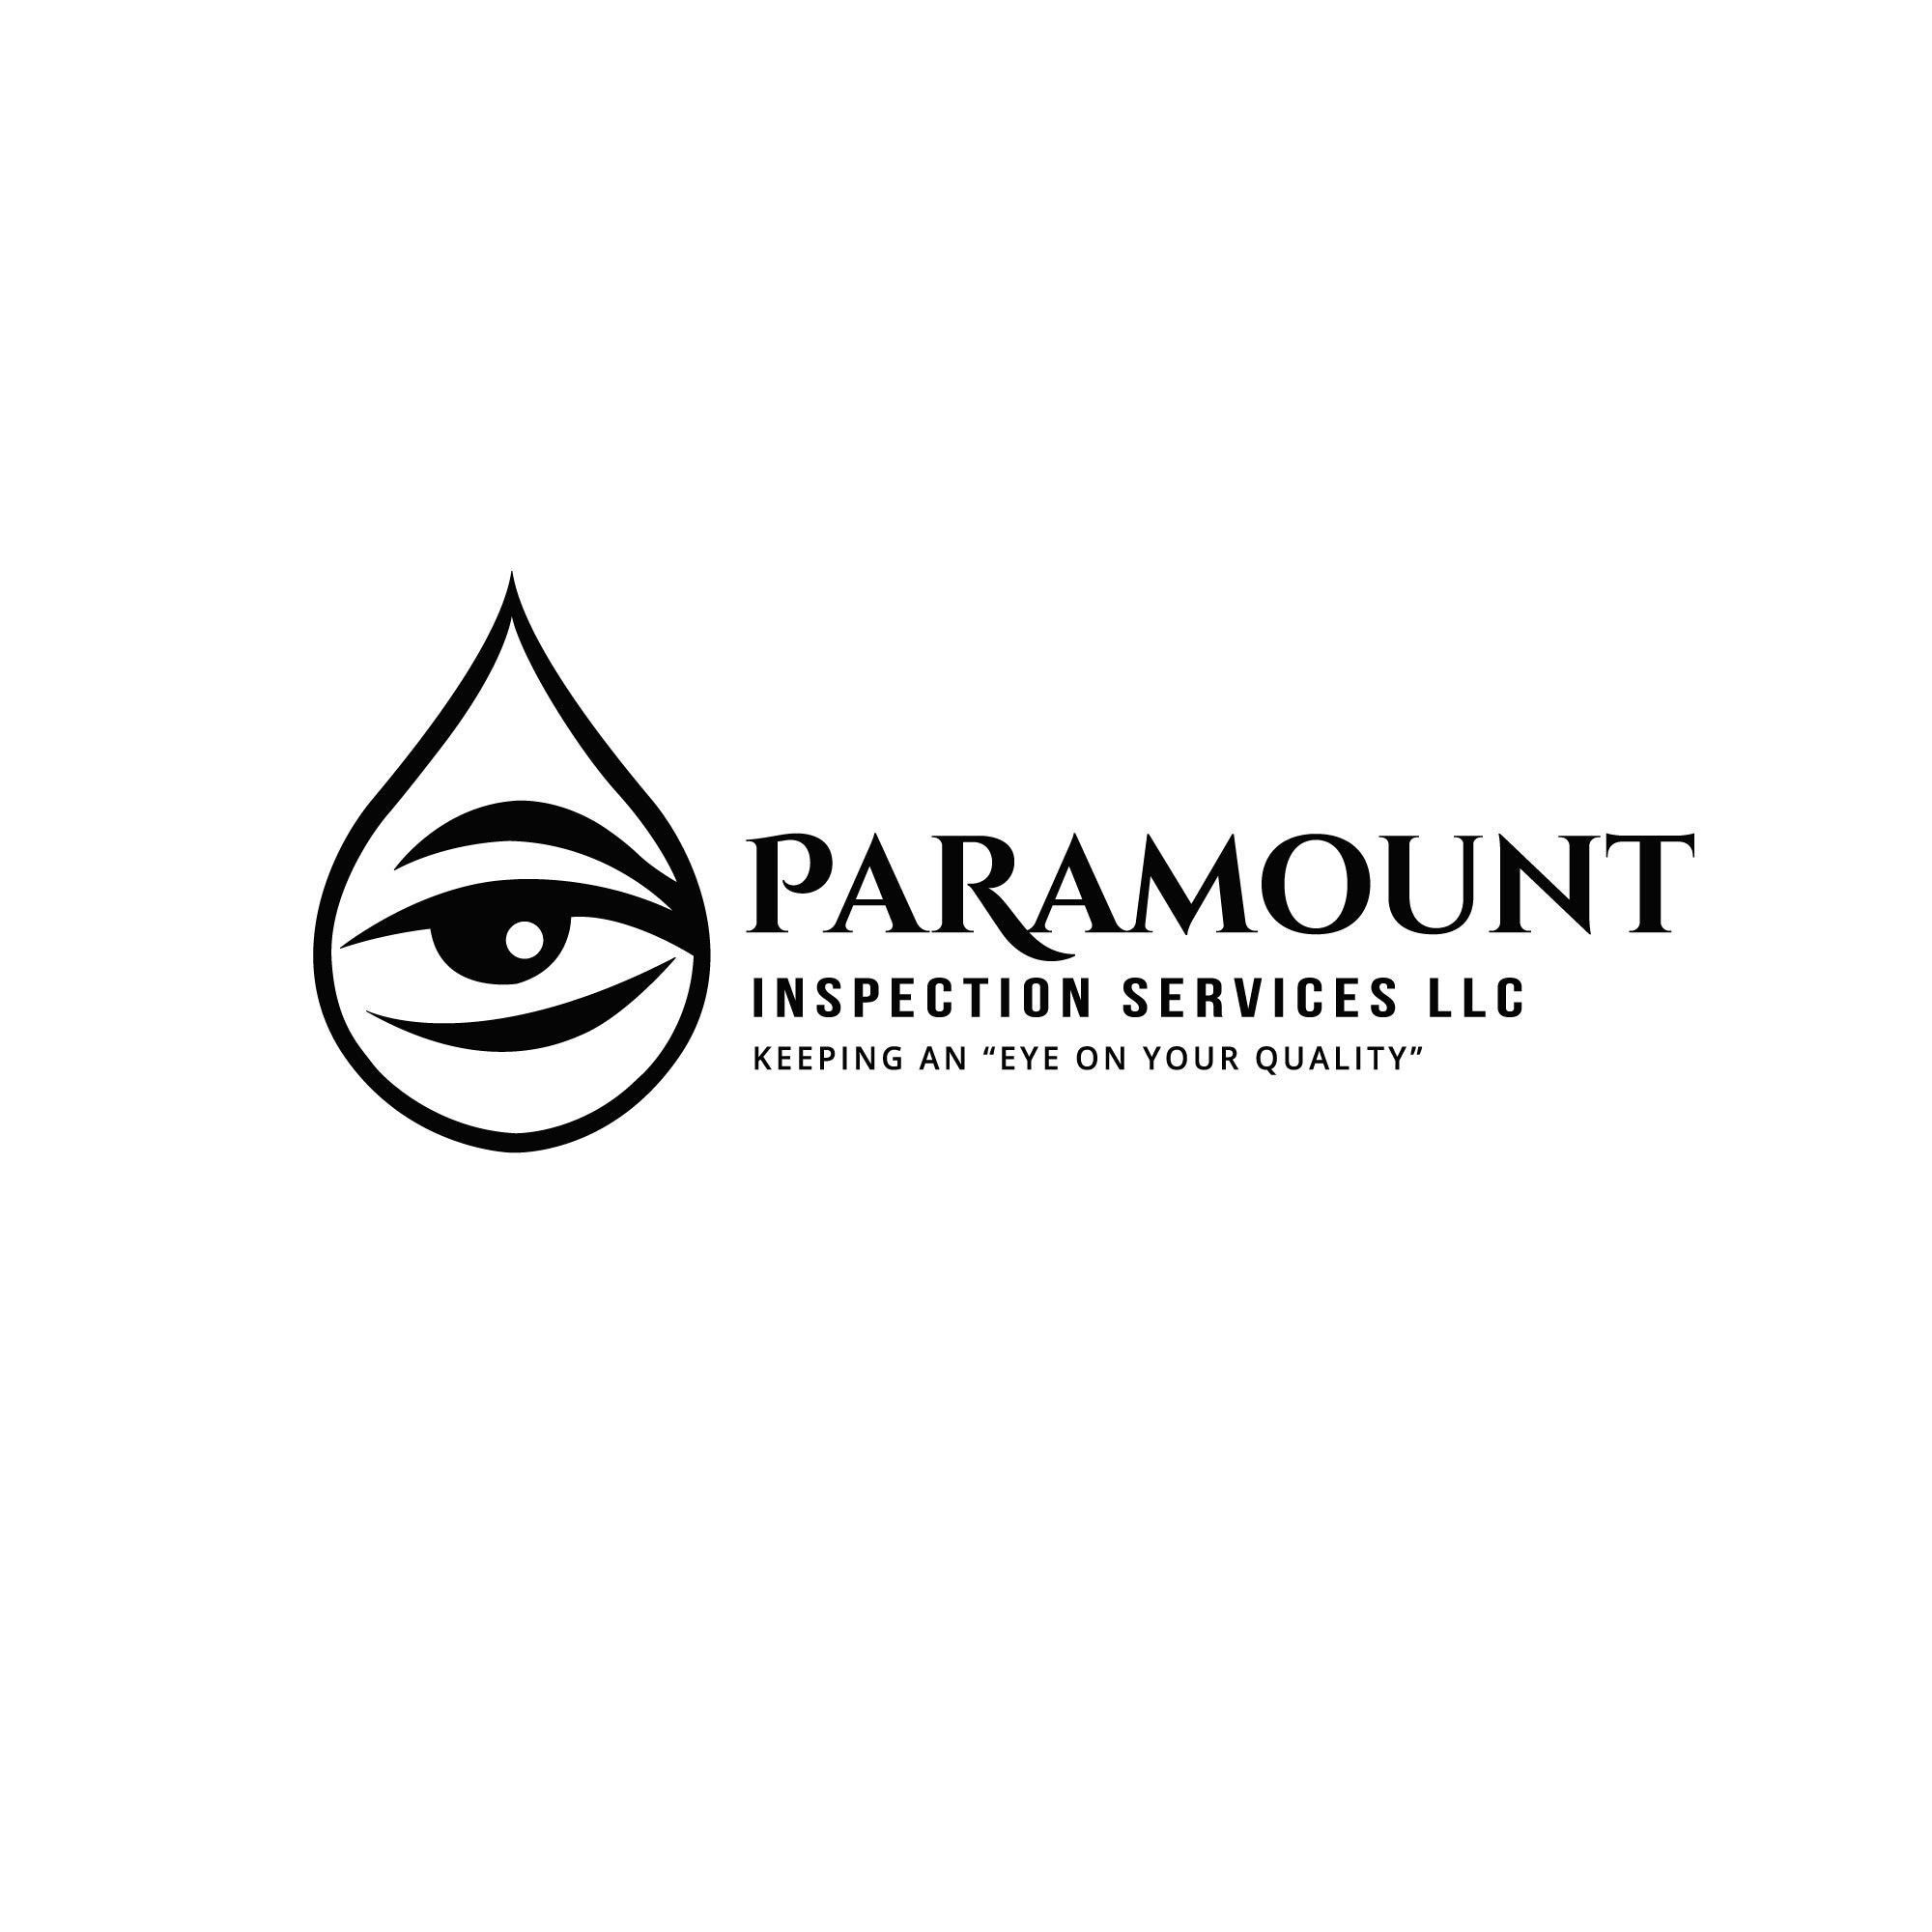 Paramount Inspection Services